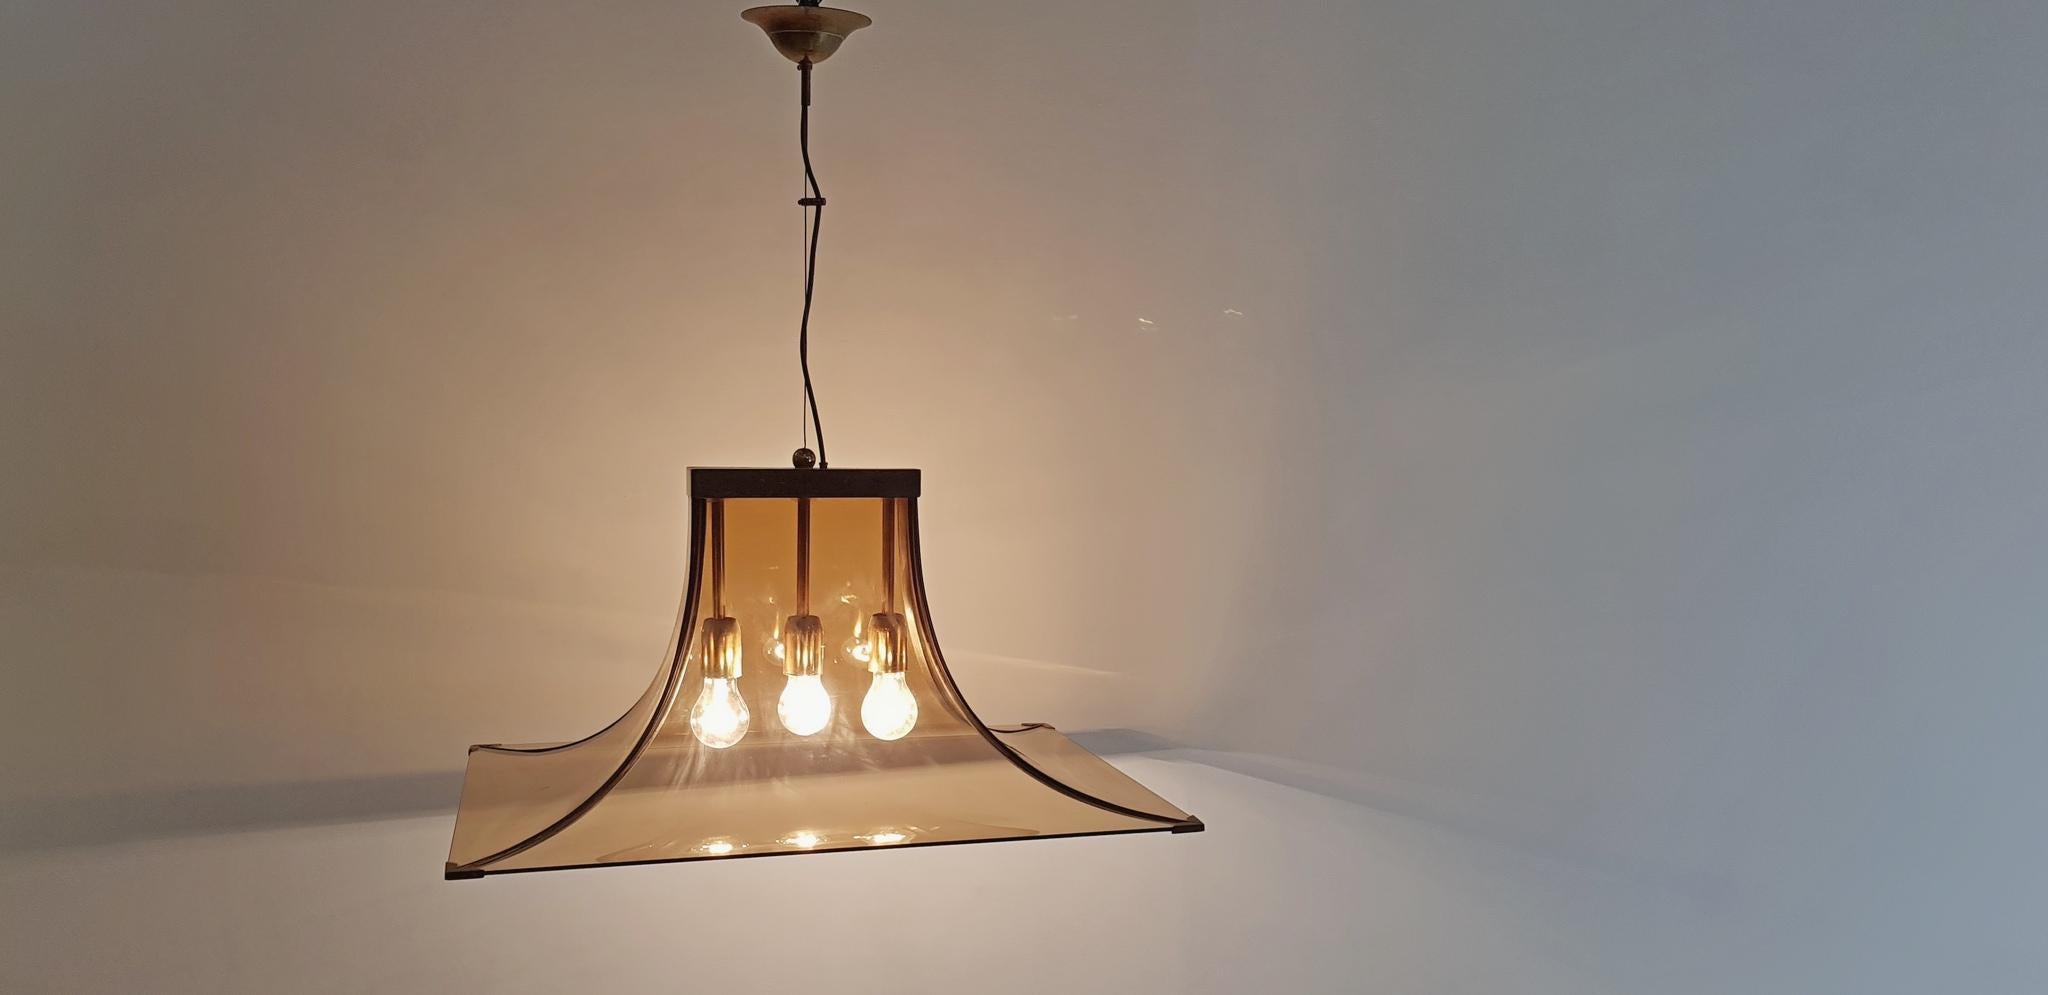 Pendant lamp by Esperia, Italy. Has smoke colored glass that gives a warm glow to the room. The glass sits on a brass structure and it uses E40 lightbulbs. Works in the US as well as Europe. The height can be varied with the steel wire which